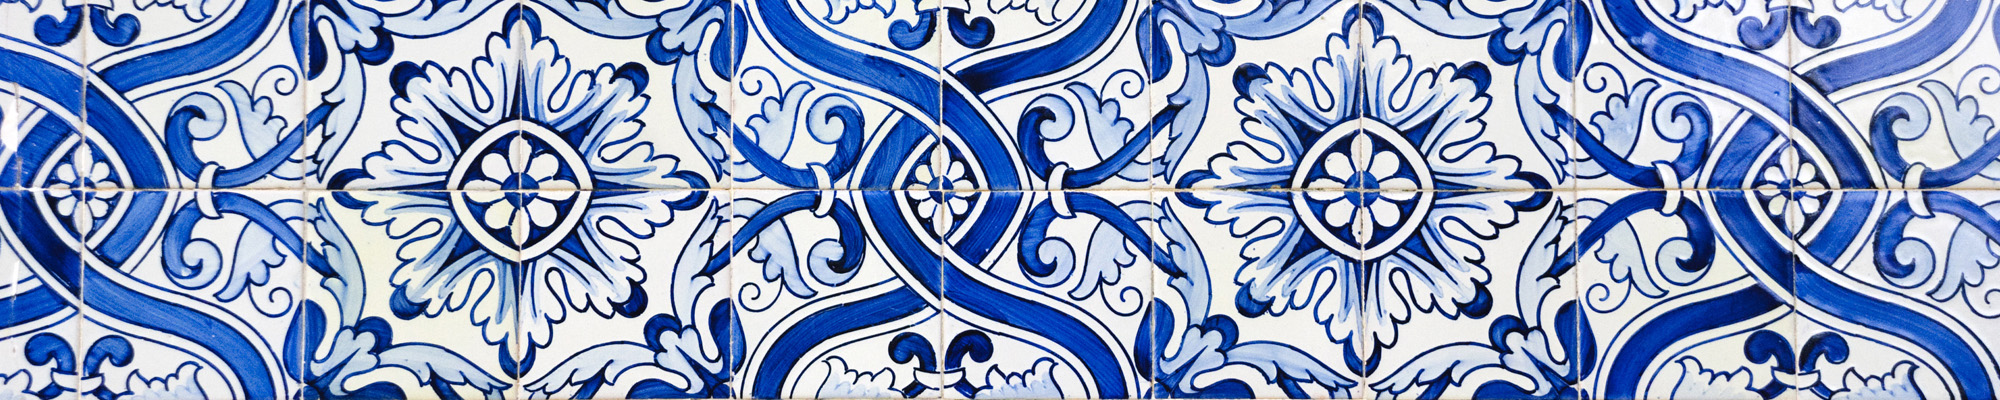 blue and white cermaic tiles